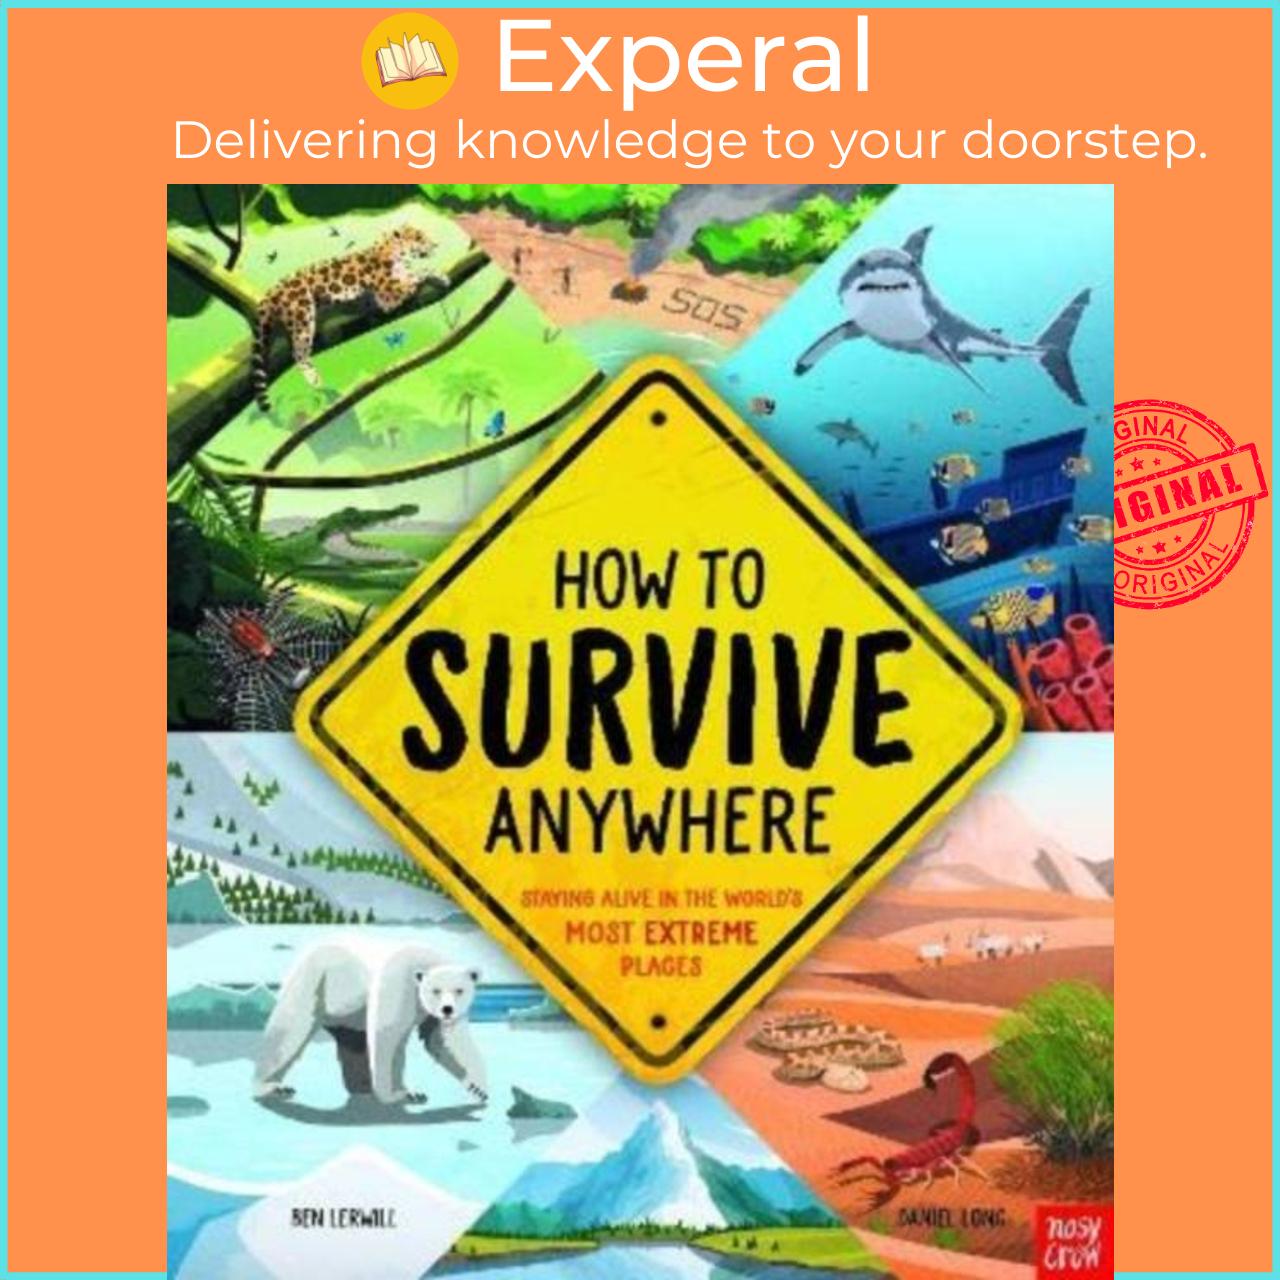 Sách - How To Survive Anywhere: Staying Alive in the World's Most Extreme Places by Daniel Long (UK edition, hardcover)